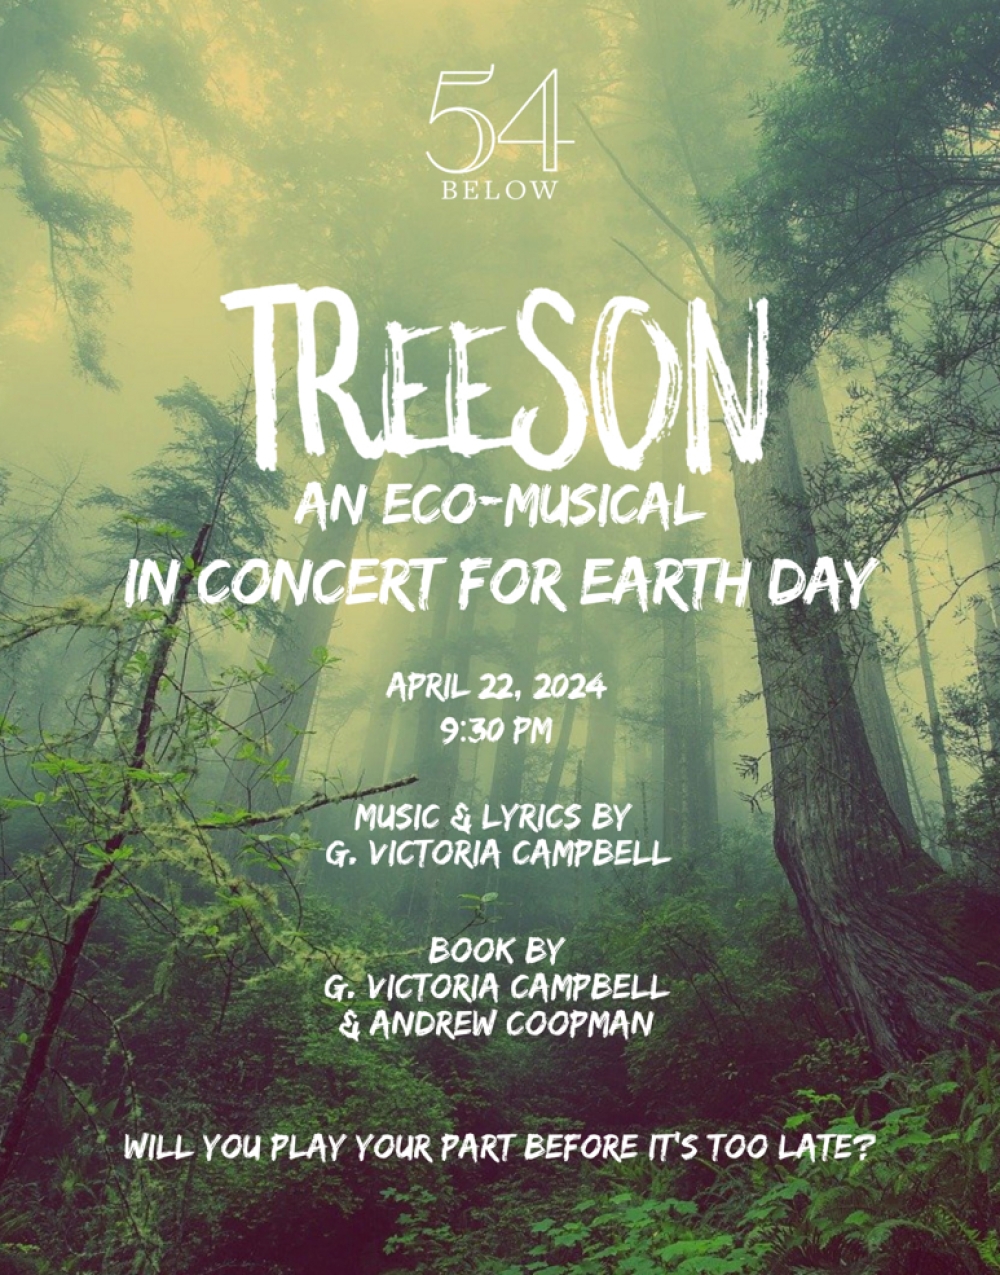 TREESON: An Eco-Musical in Concert for Earth Day at 54 Below